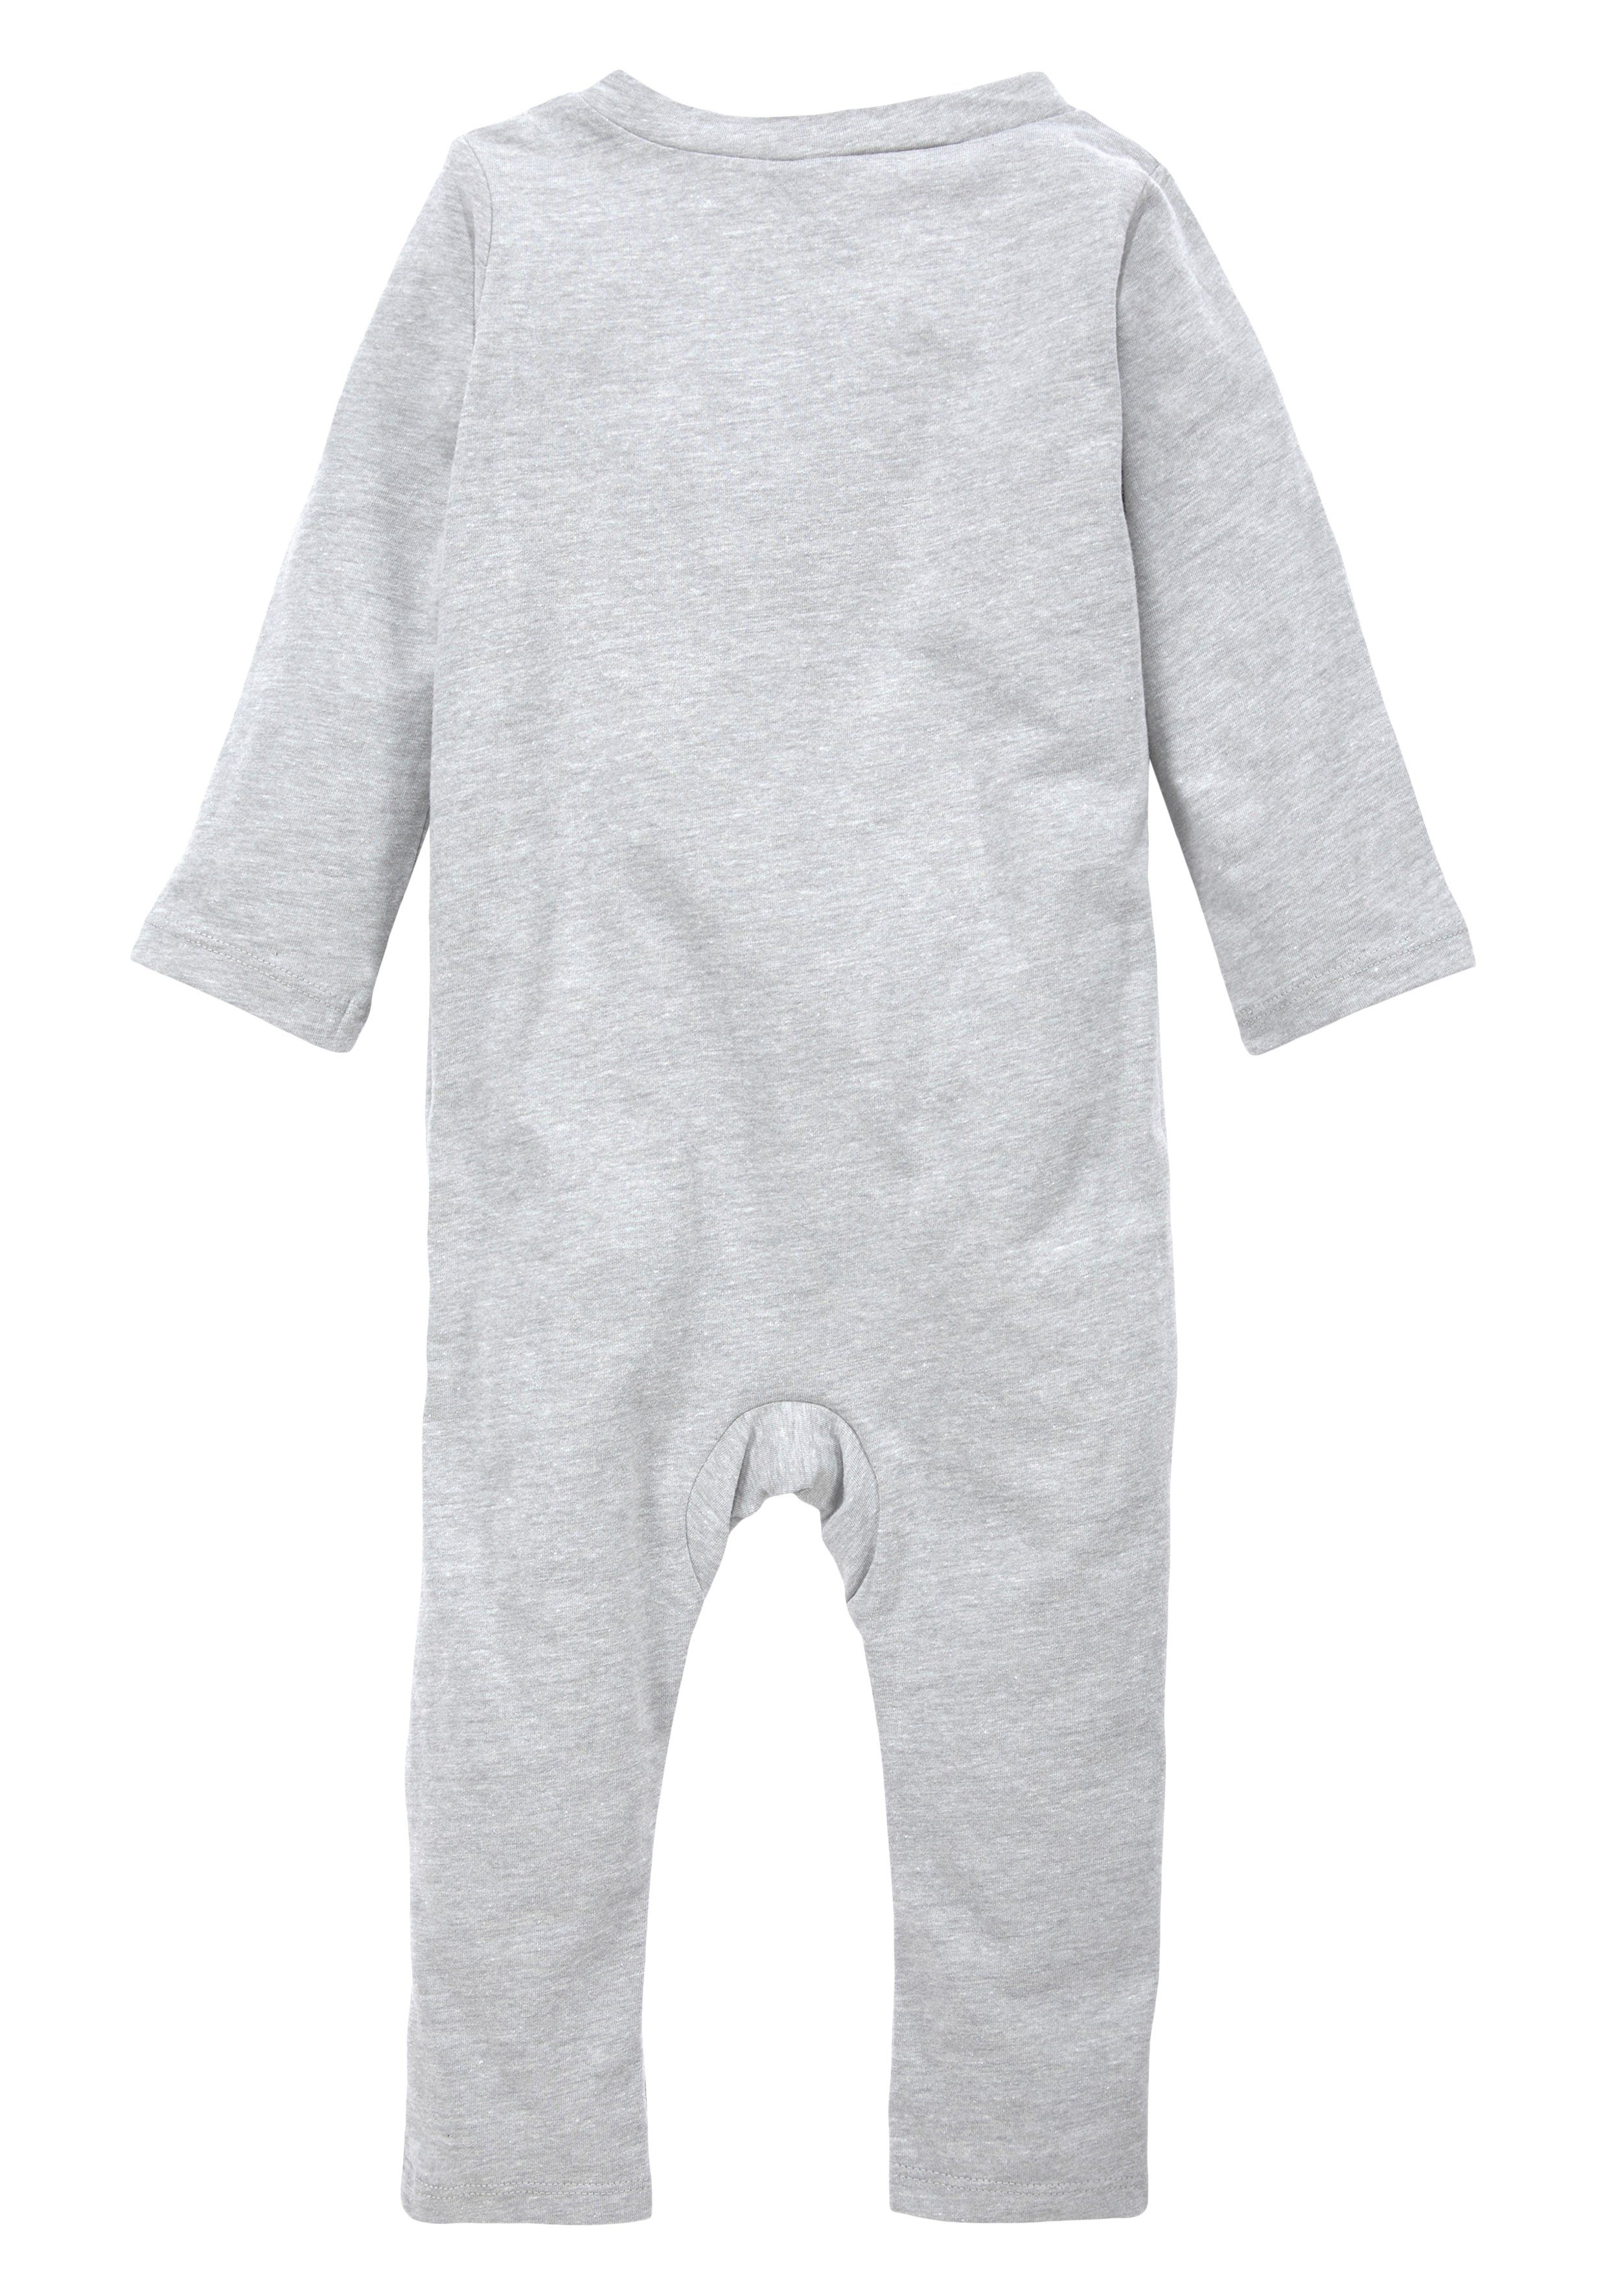 HBR dk-grey-heat Strampler NON-FOOTED Nike COVERALL Sportswear